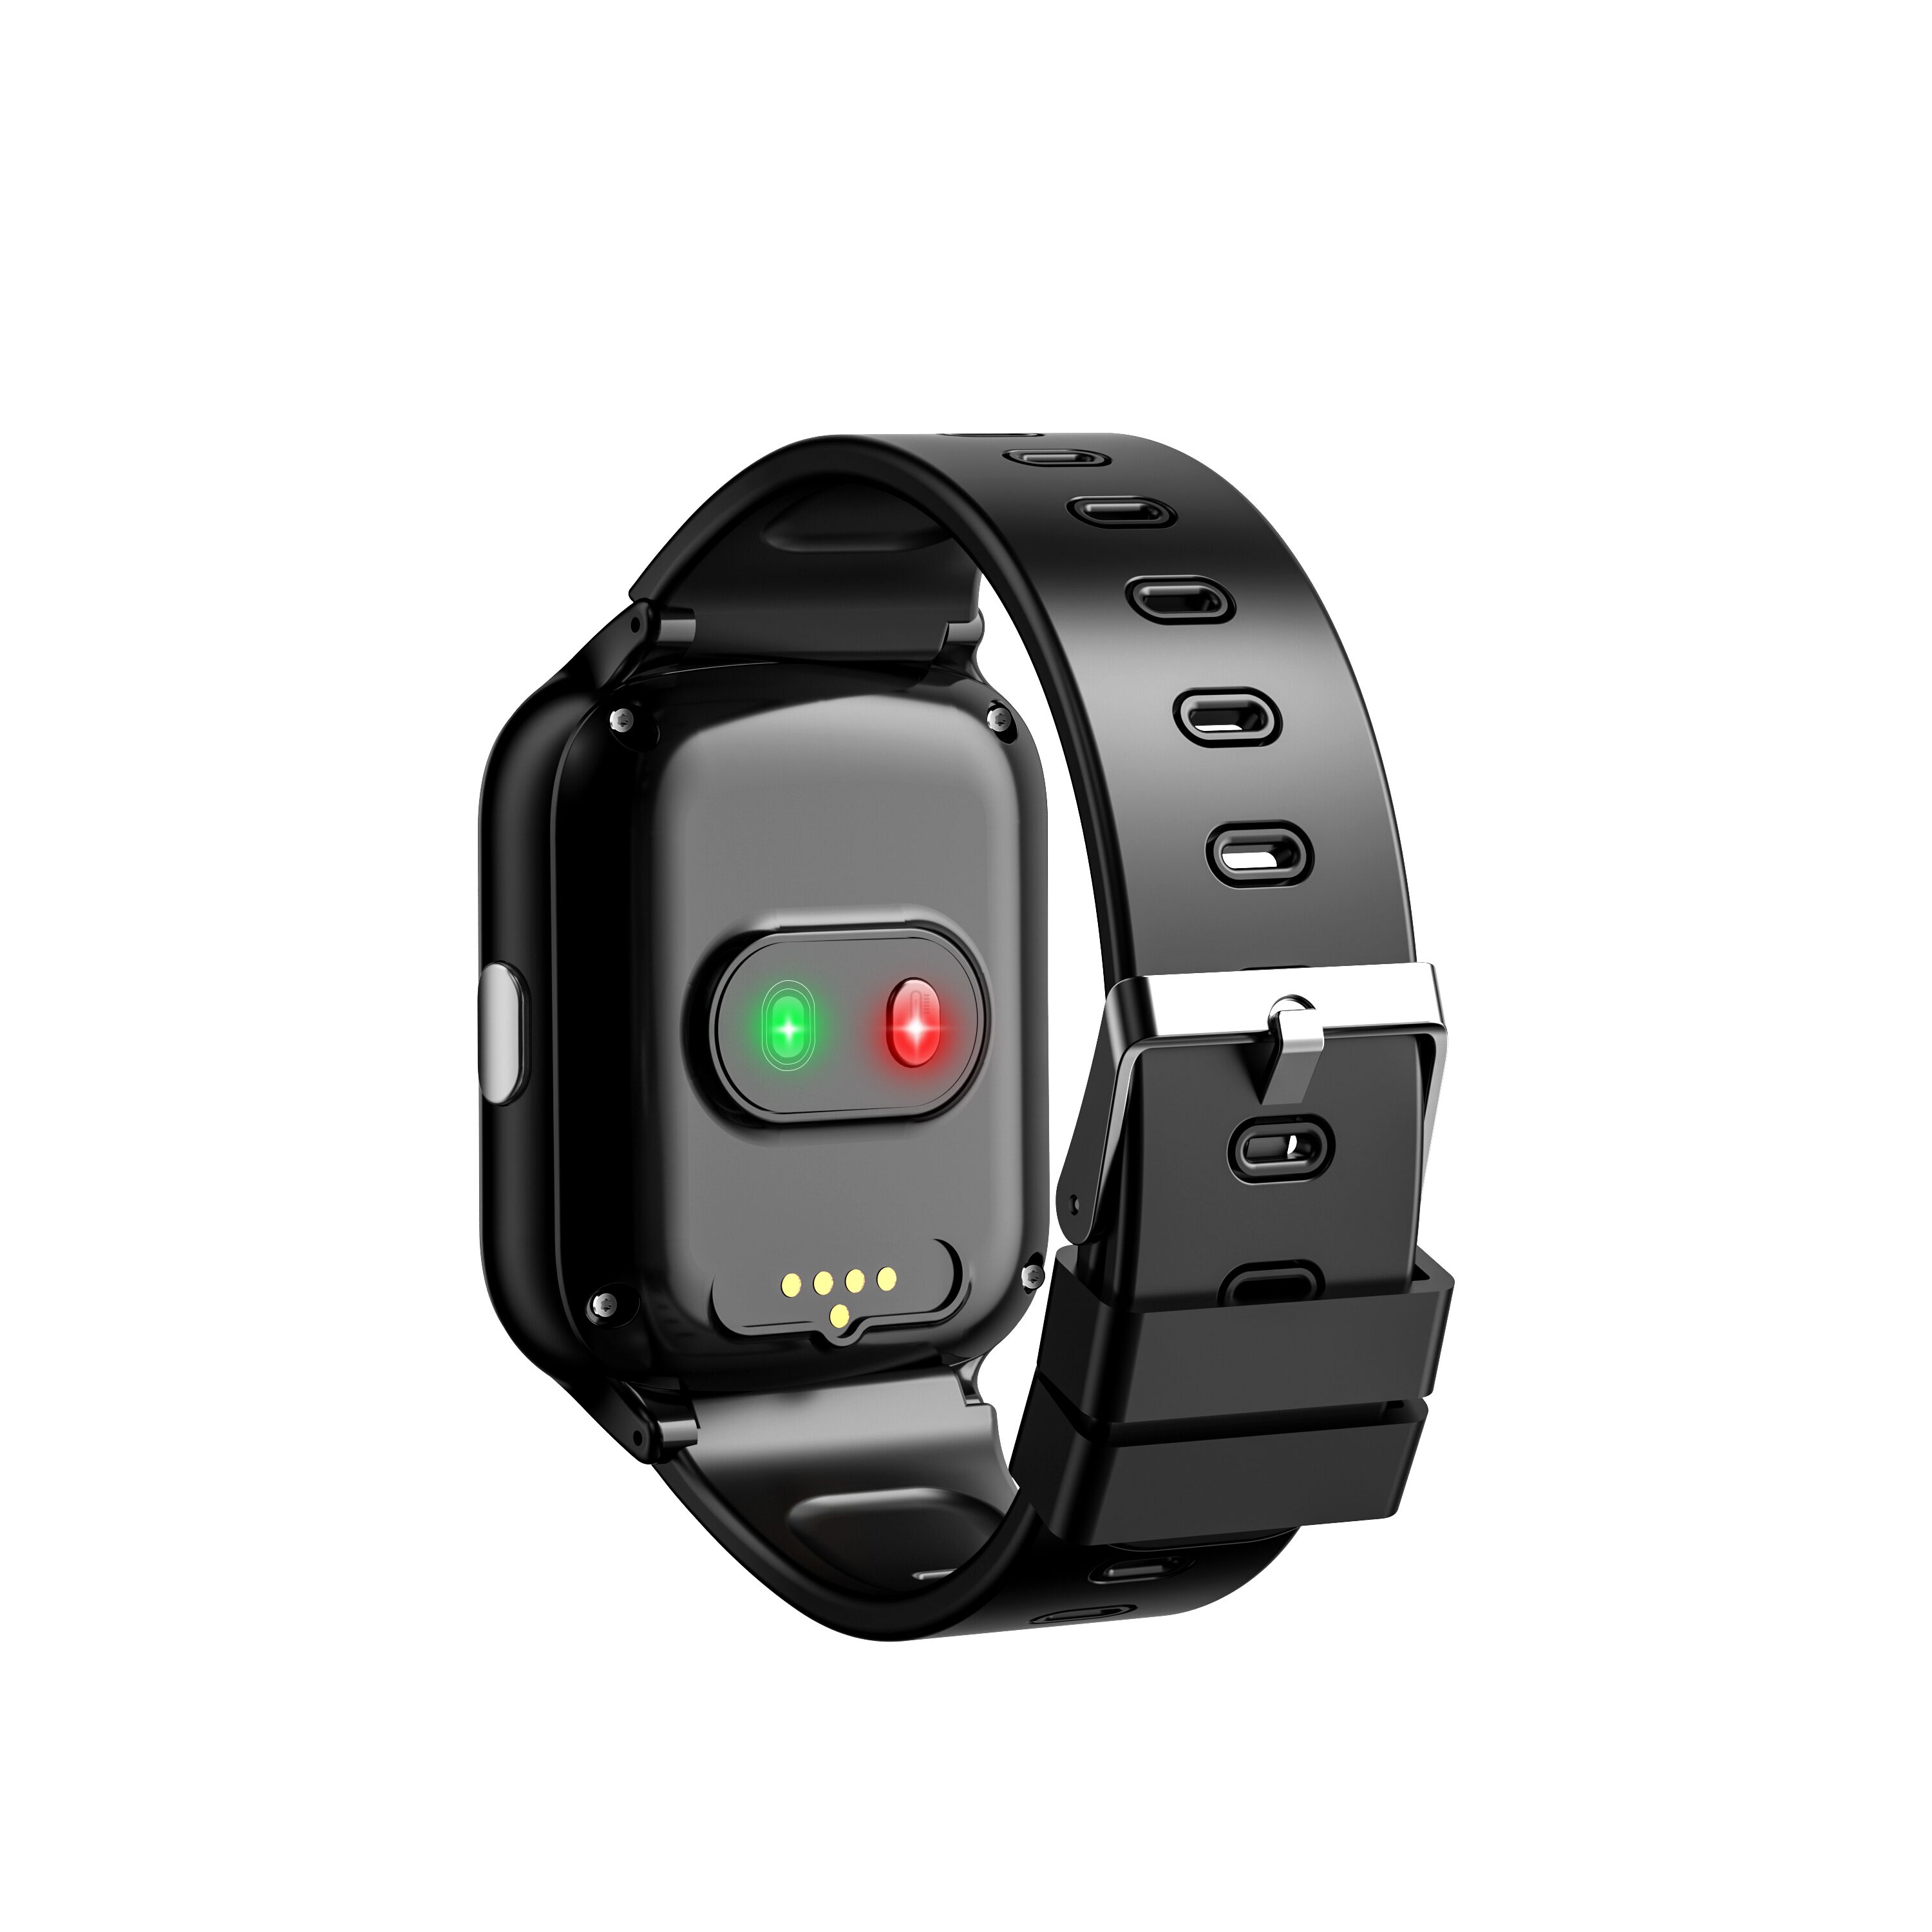 LTE Android 8.1 Fall Down Alert Elderly GPS Watch Tracker D41